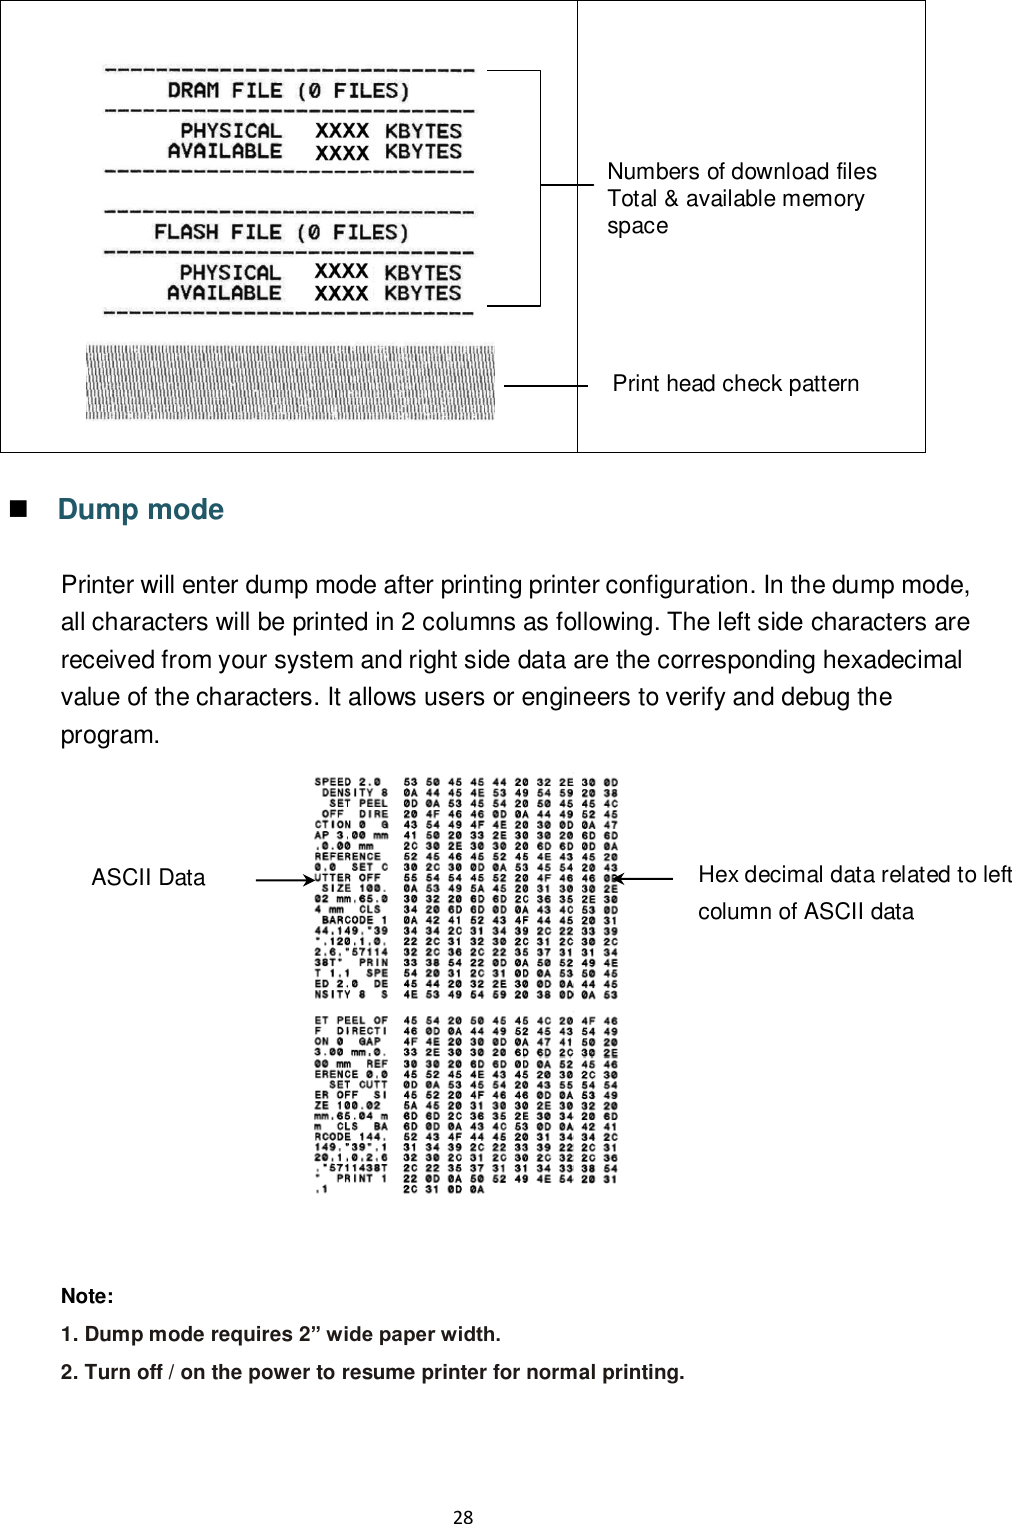 28          Numbers of download files Total &amp; available memory space      Print head check pattern   Dump mode  Printer will enter dump mode after printing printer configuration. In the dump mode, all characters will be printed in 2 columns as following. The left side characters are received from your system and right side data are the corresponding hexadecimal value of the characters. It allows users or engineers to verify and debug the program.    Note: 1. Dump mode requires 2” wide paper width. 2. Turn off / on the power to resume printer for normal printing.     ASCII Data Hex decimal data related to left column of ASCII data 